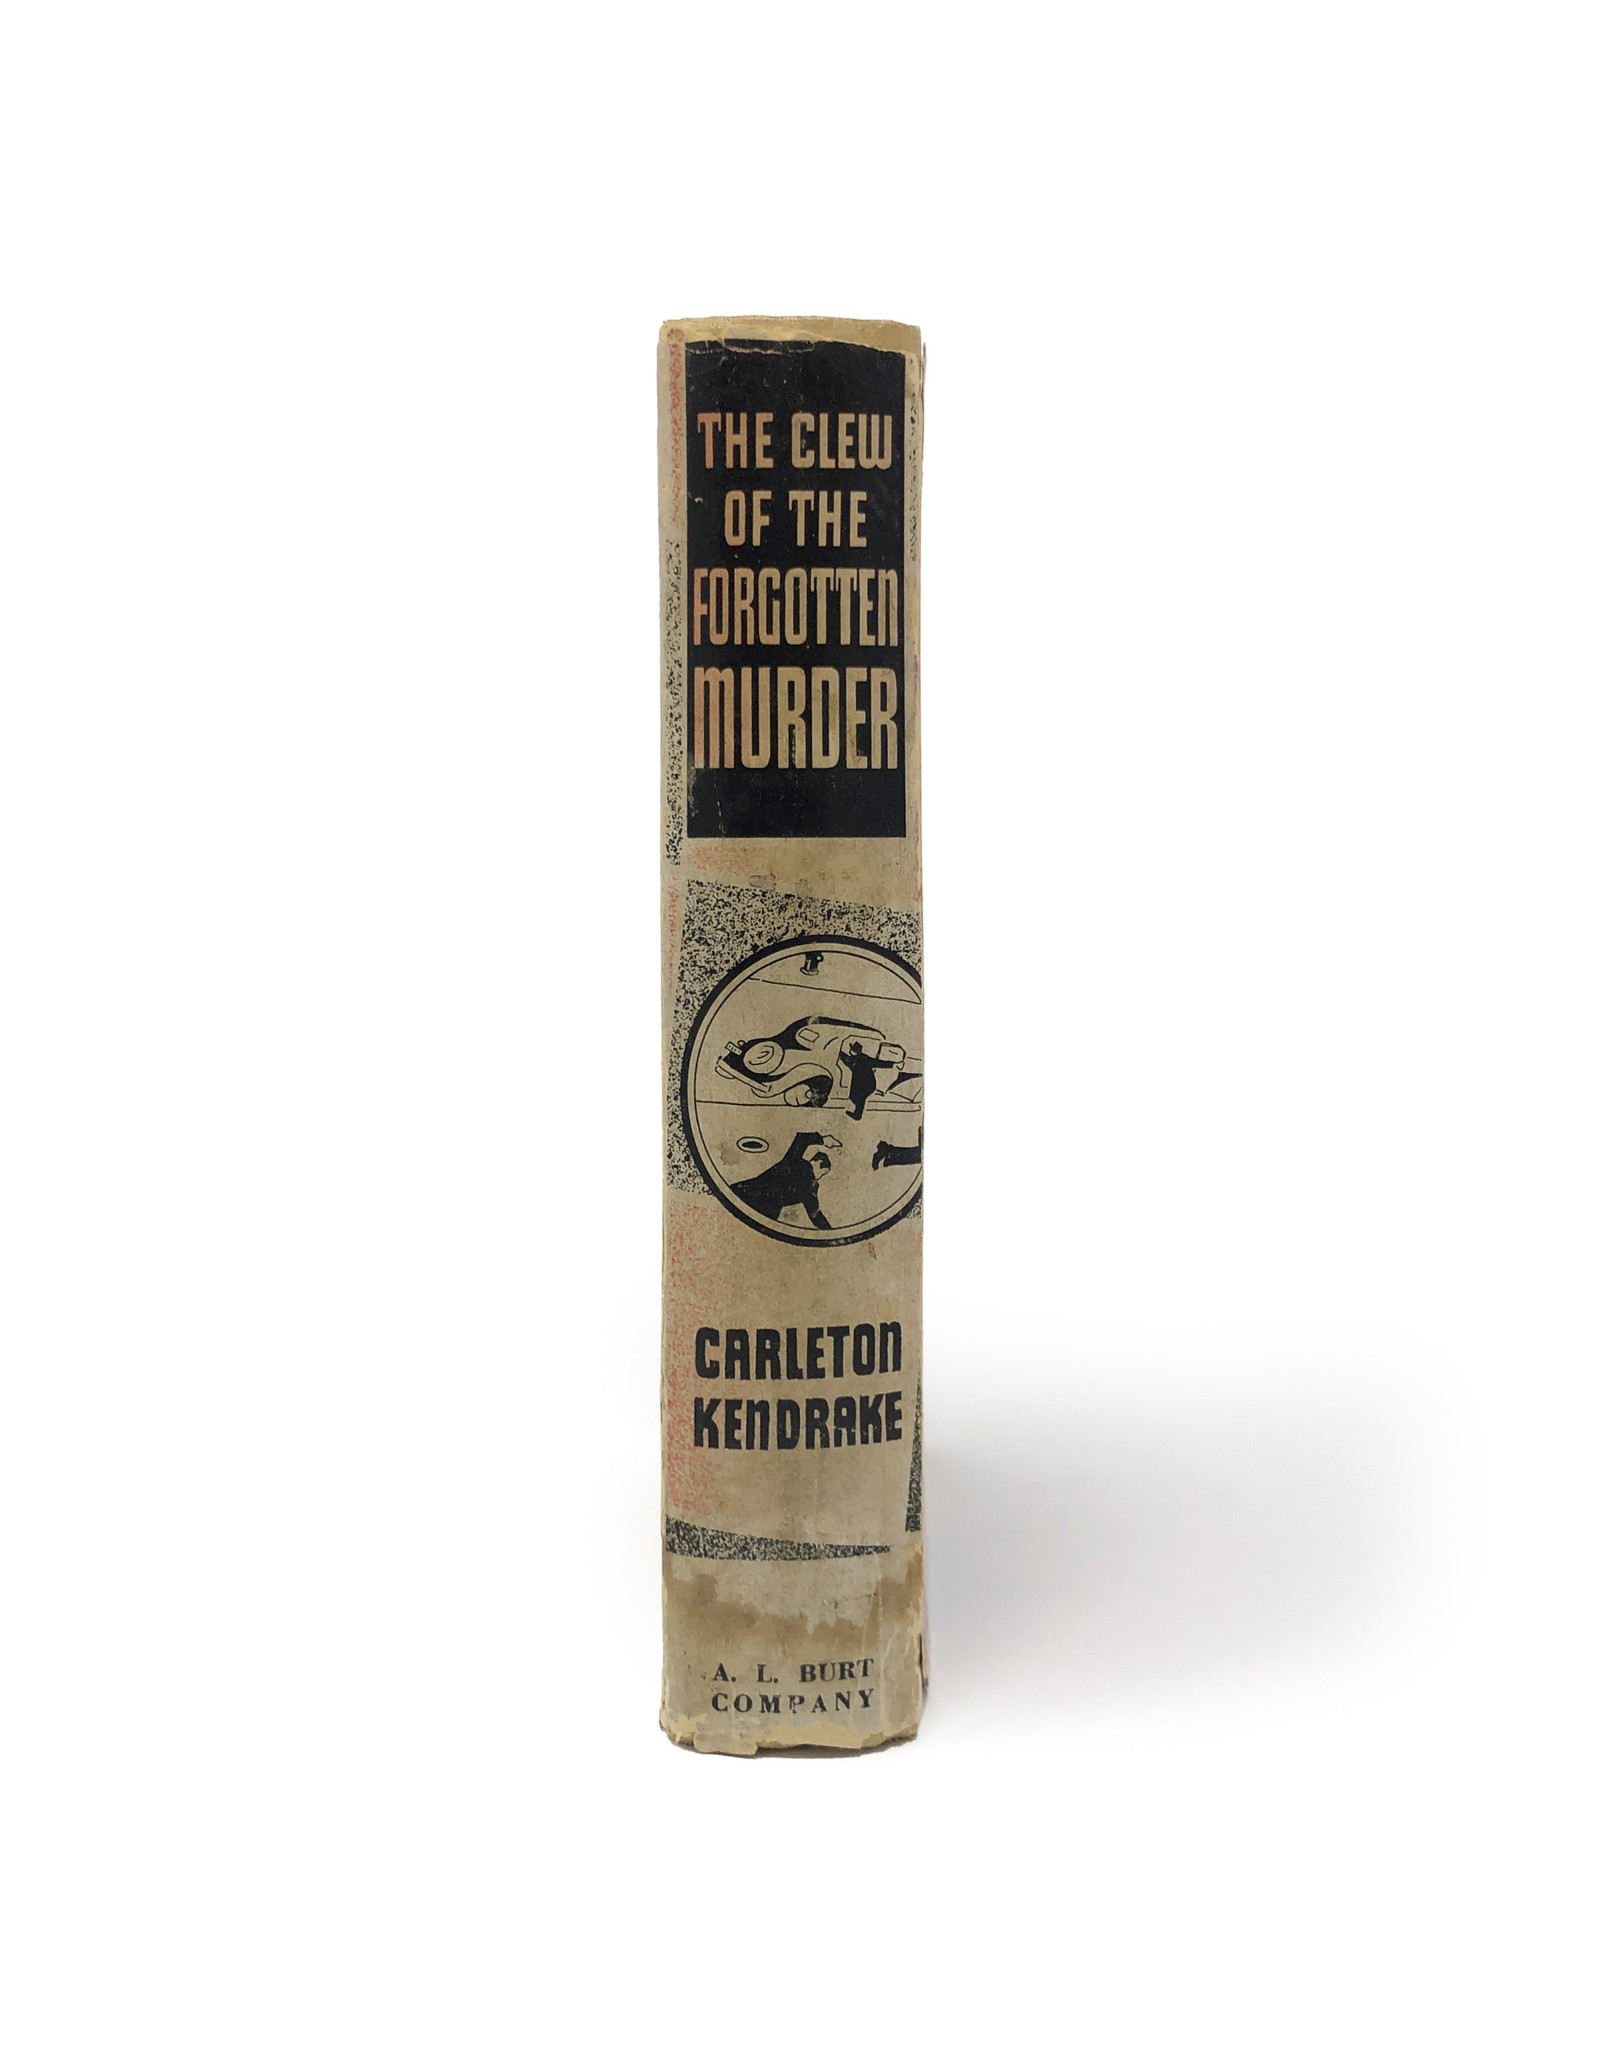 A. L. Burt Co. The Clue of the Forgotten Murder by Carleton Kendrake